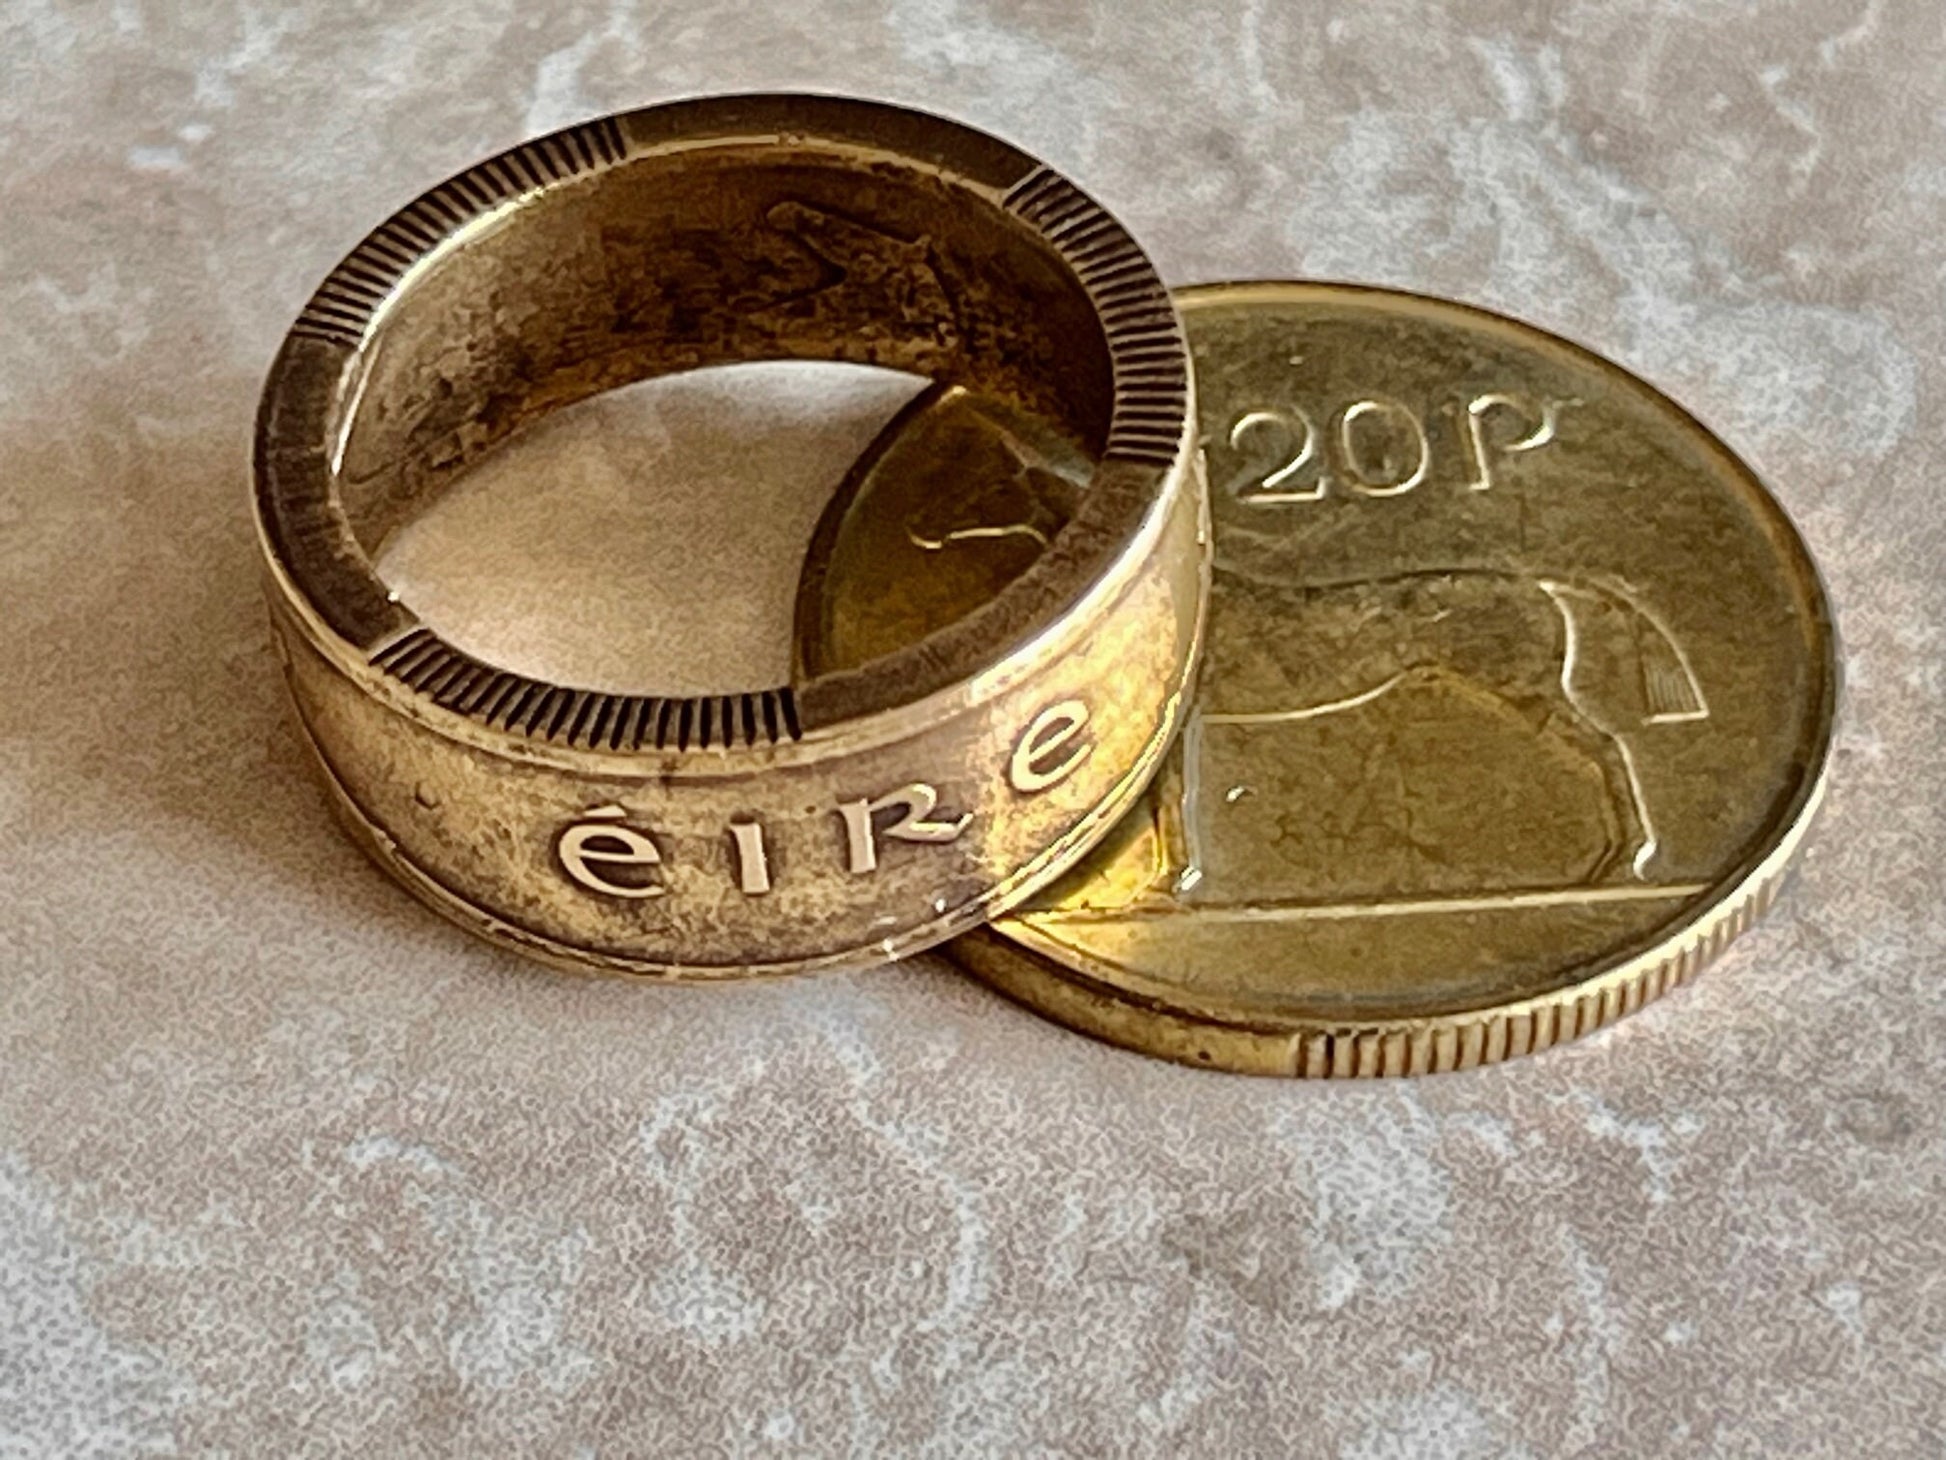 Ireland Coin Ring 20 Pence Irish Celtic Harp Lucky Shamrock Jewelry Gift Charm For Friend Coin Ring Gift For Him Her World Coins Collector